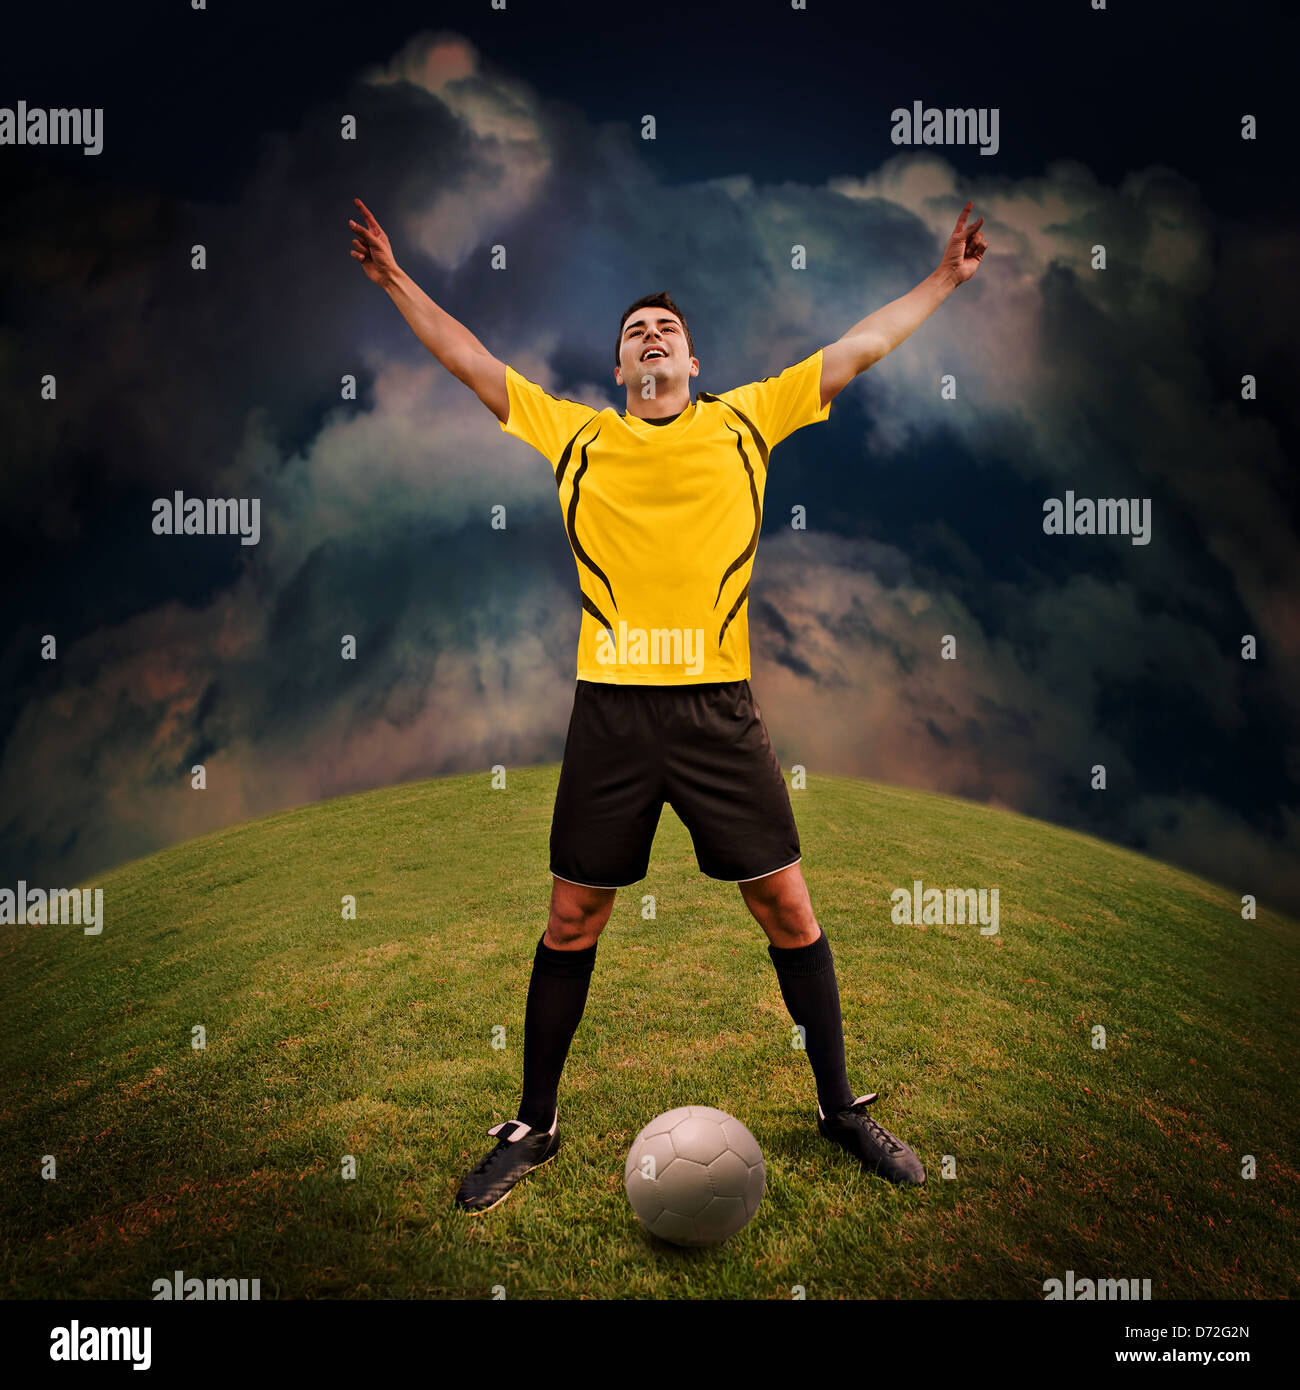 soccer or football player on the field Stock Photo